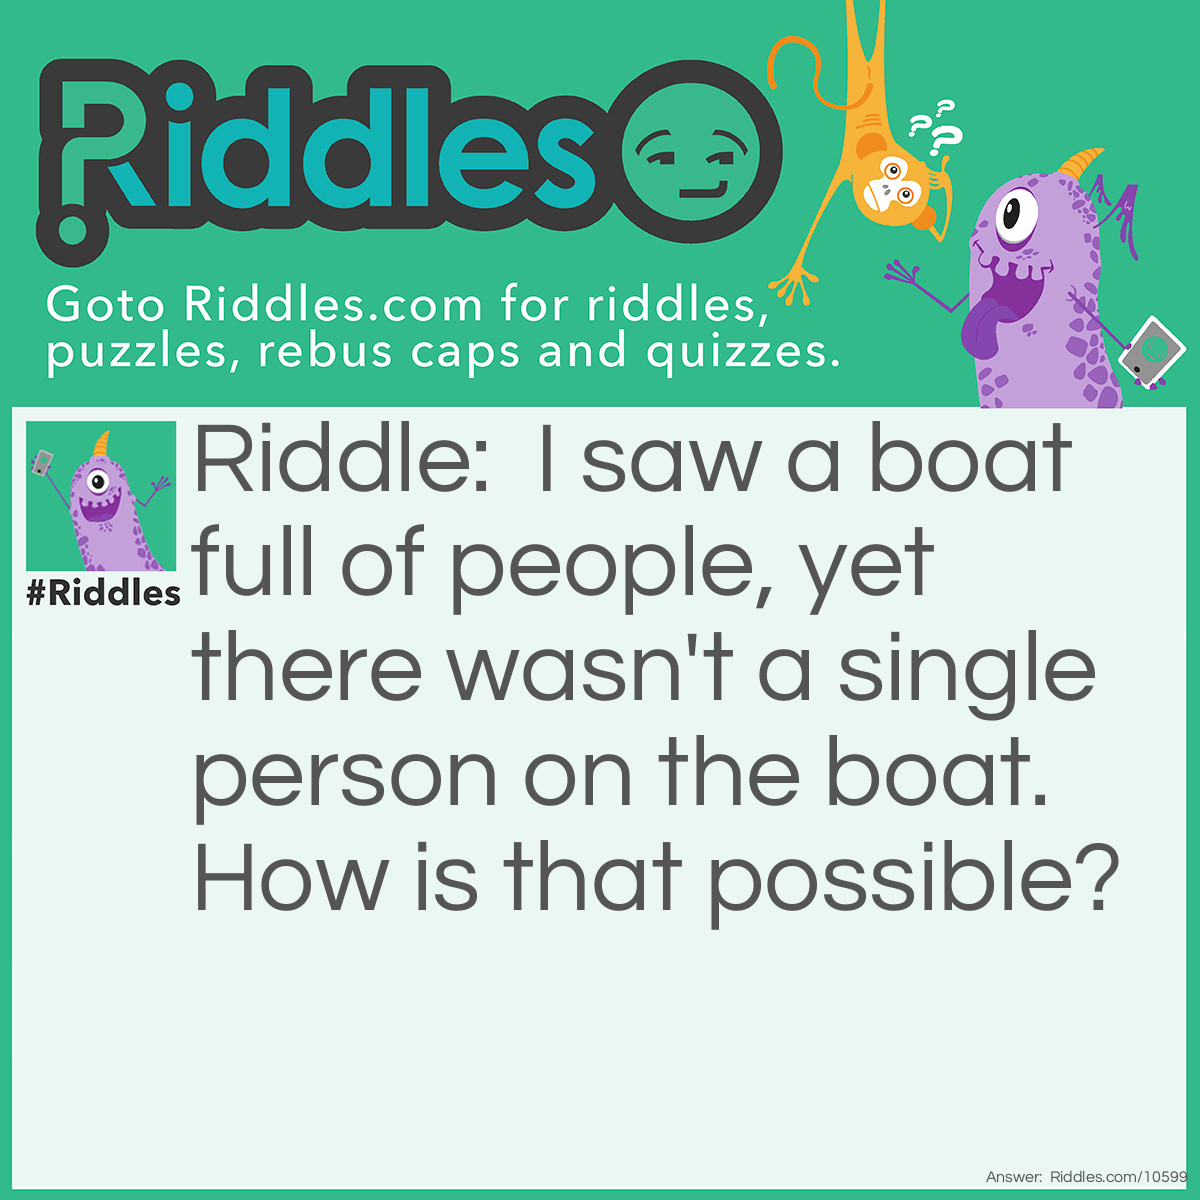 Riddle: I saw a boat full of people, yet there wasn't a single person on the boat. How is that possible? Answer: They were all married. Because there are only couples and no person.